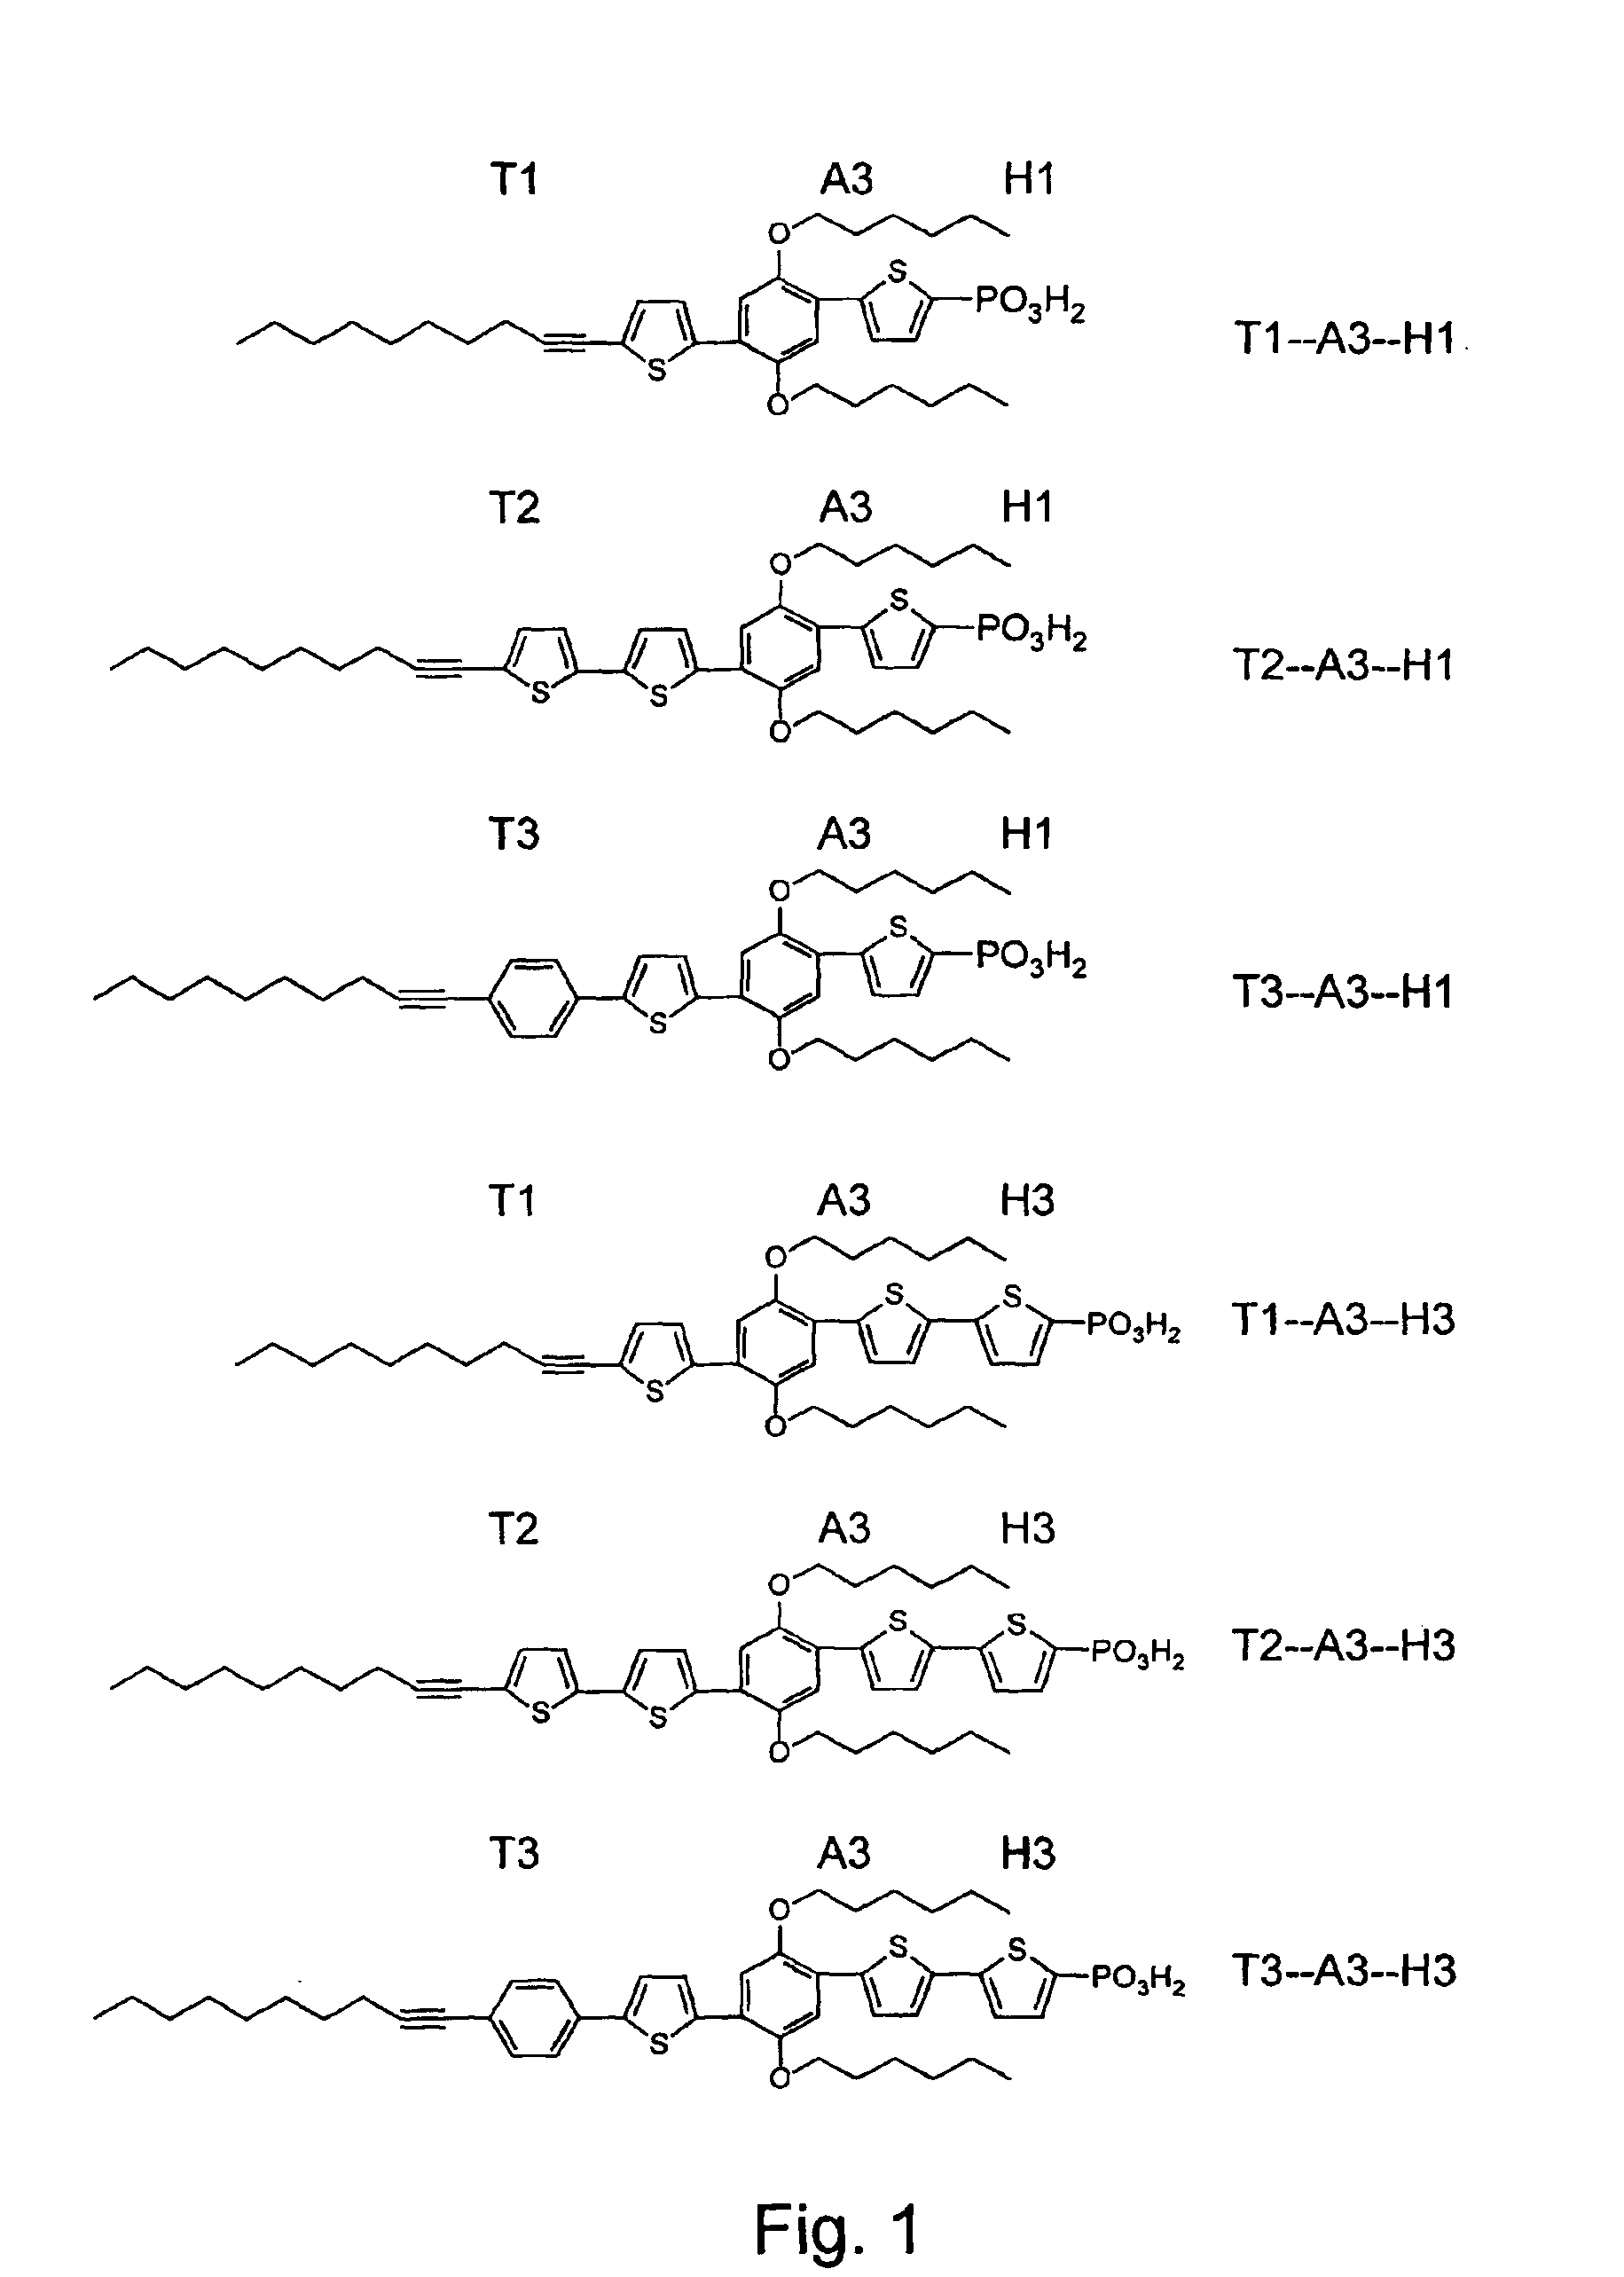 Organic species that facilitate charge transfer to or from nanostructures